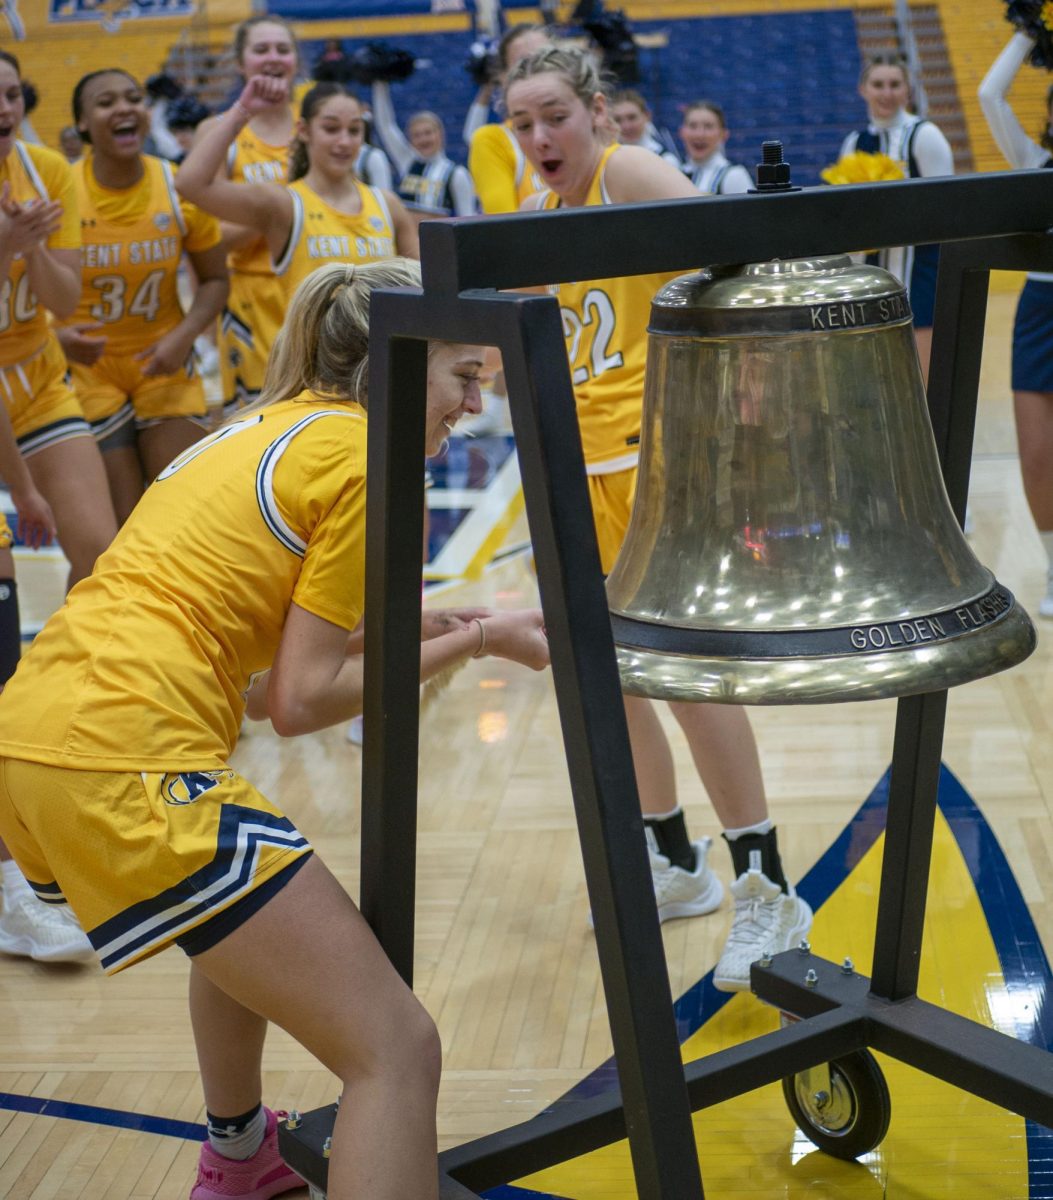 Redshirt sophomore guard Kaley Perkins rings the Starner Victory Bell, with graduate student guard Abby Ogle and the team cheering her on, after following the Golden Flashes 109-31 win over LaRoche on Dec. 30, 2023. Perkins, a transfer from Oklahoma, netted her season high in minutes, rebounds, blocks and made field goals in the game and was selected by the team to ring the bell.